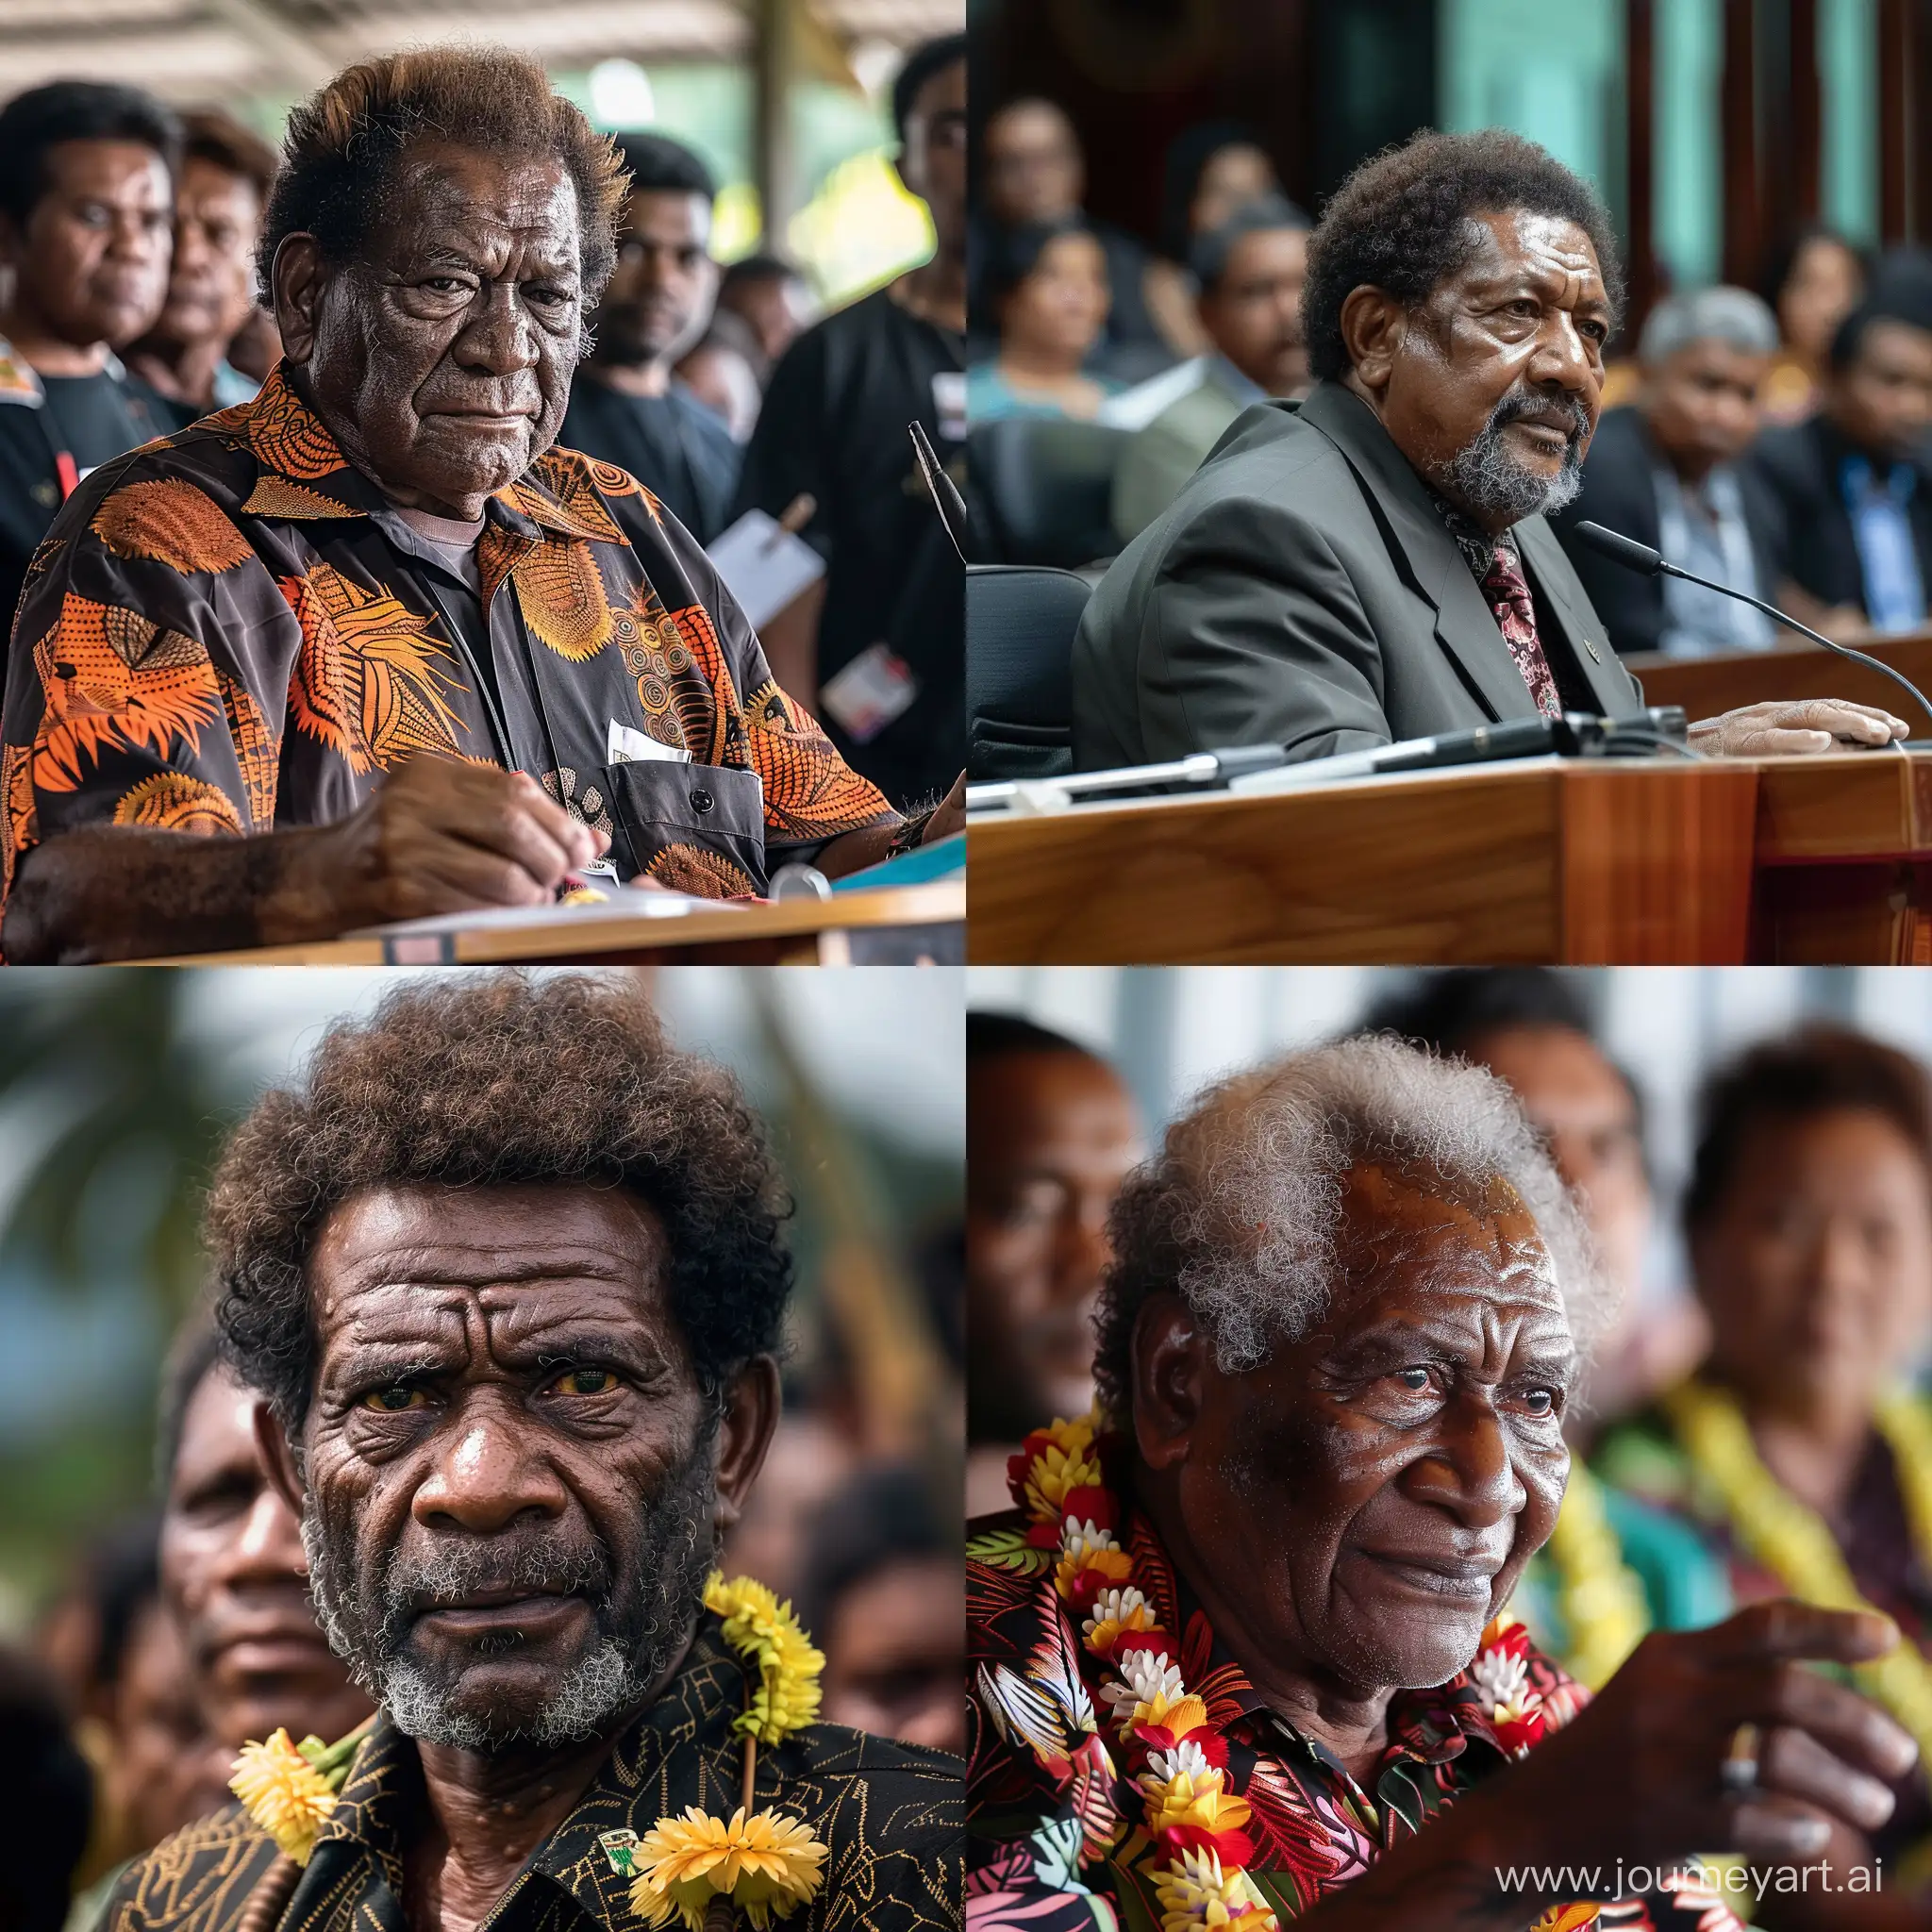 A Papua New Guinea Politician going for Vote of No Confidence